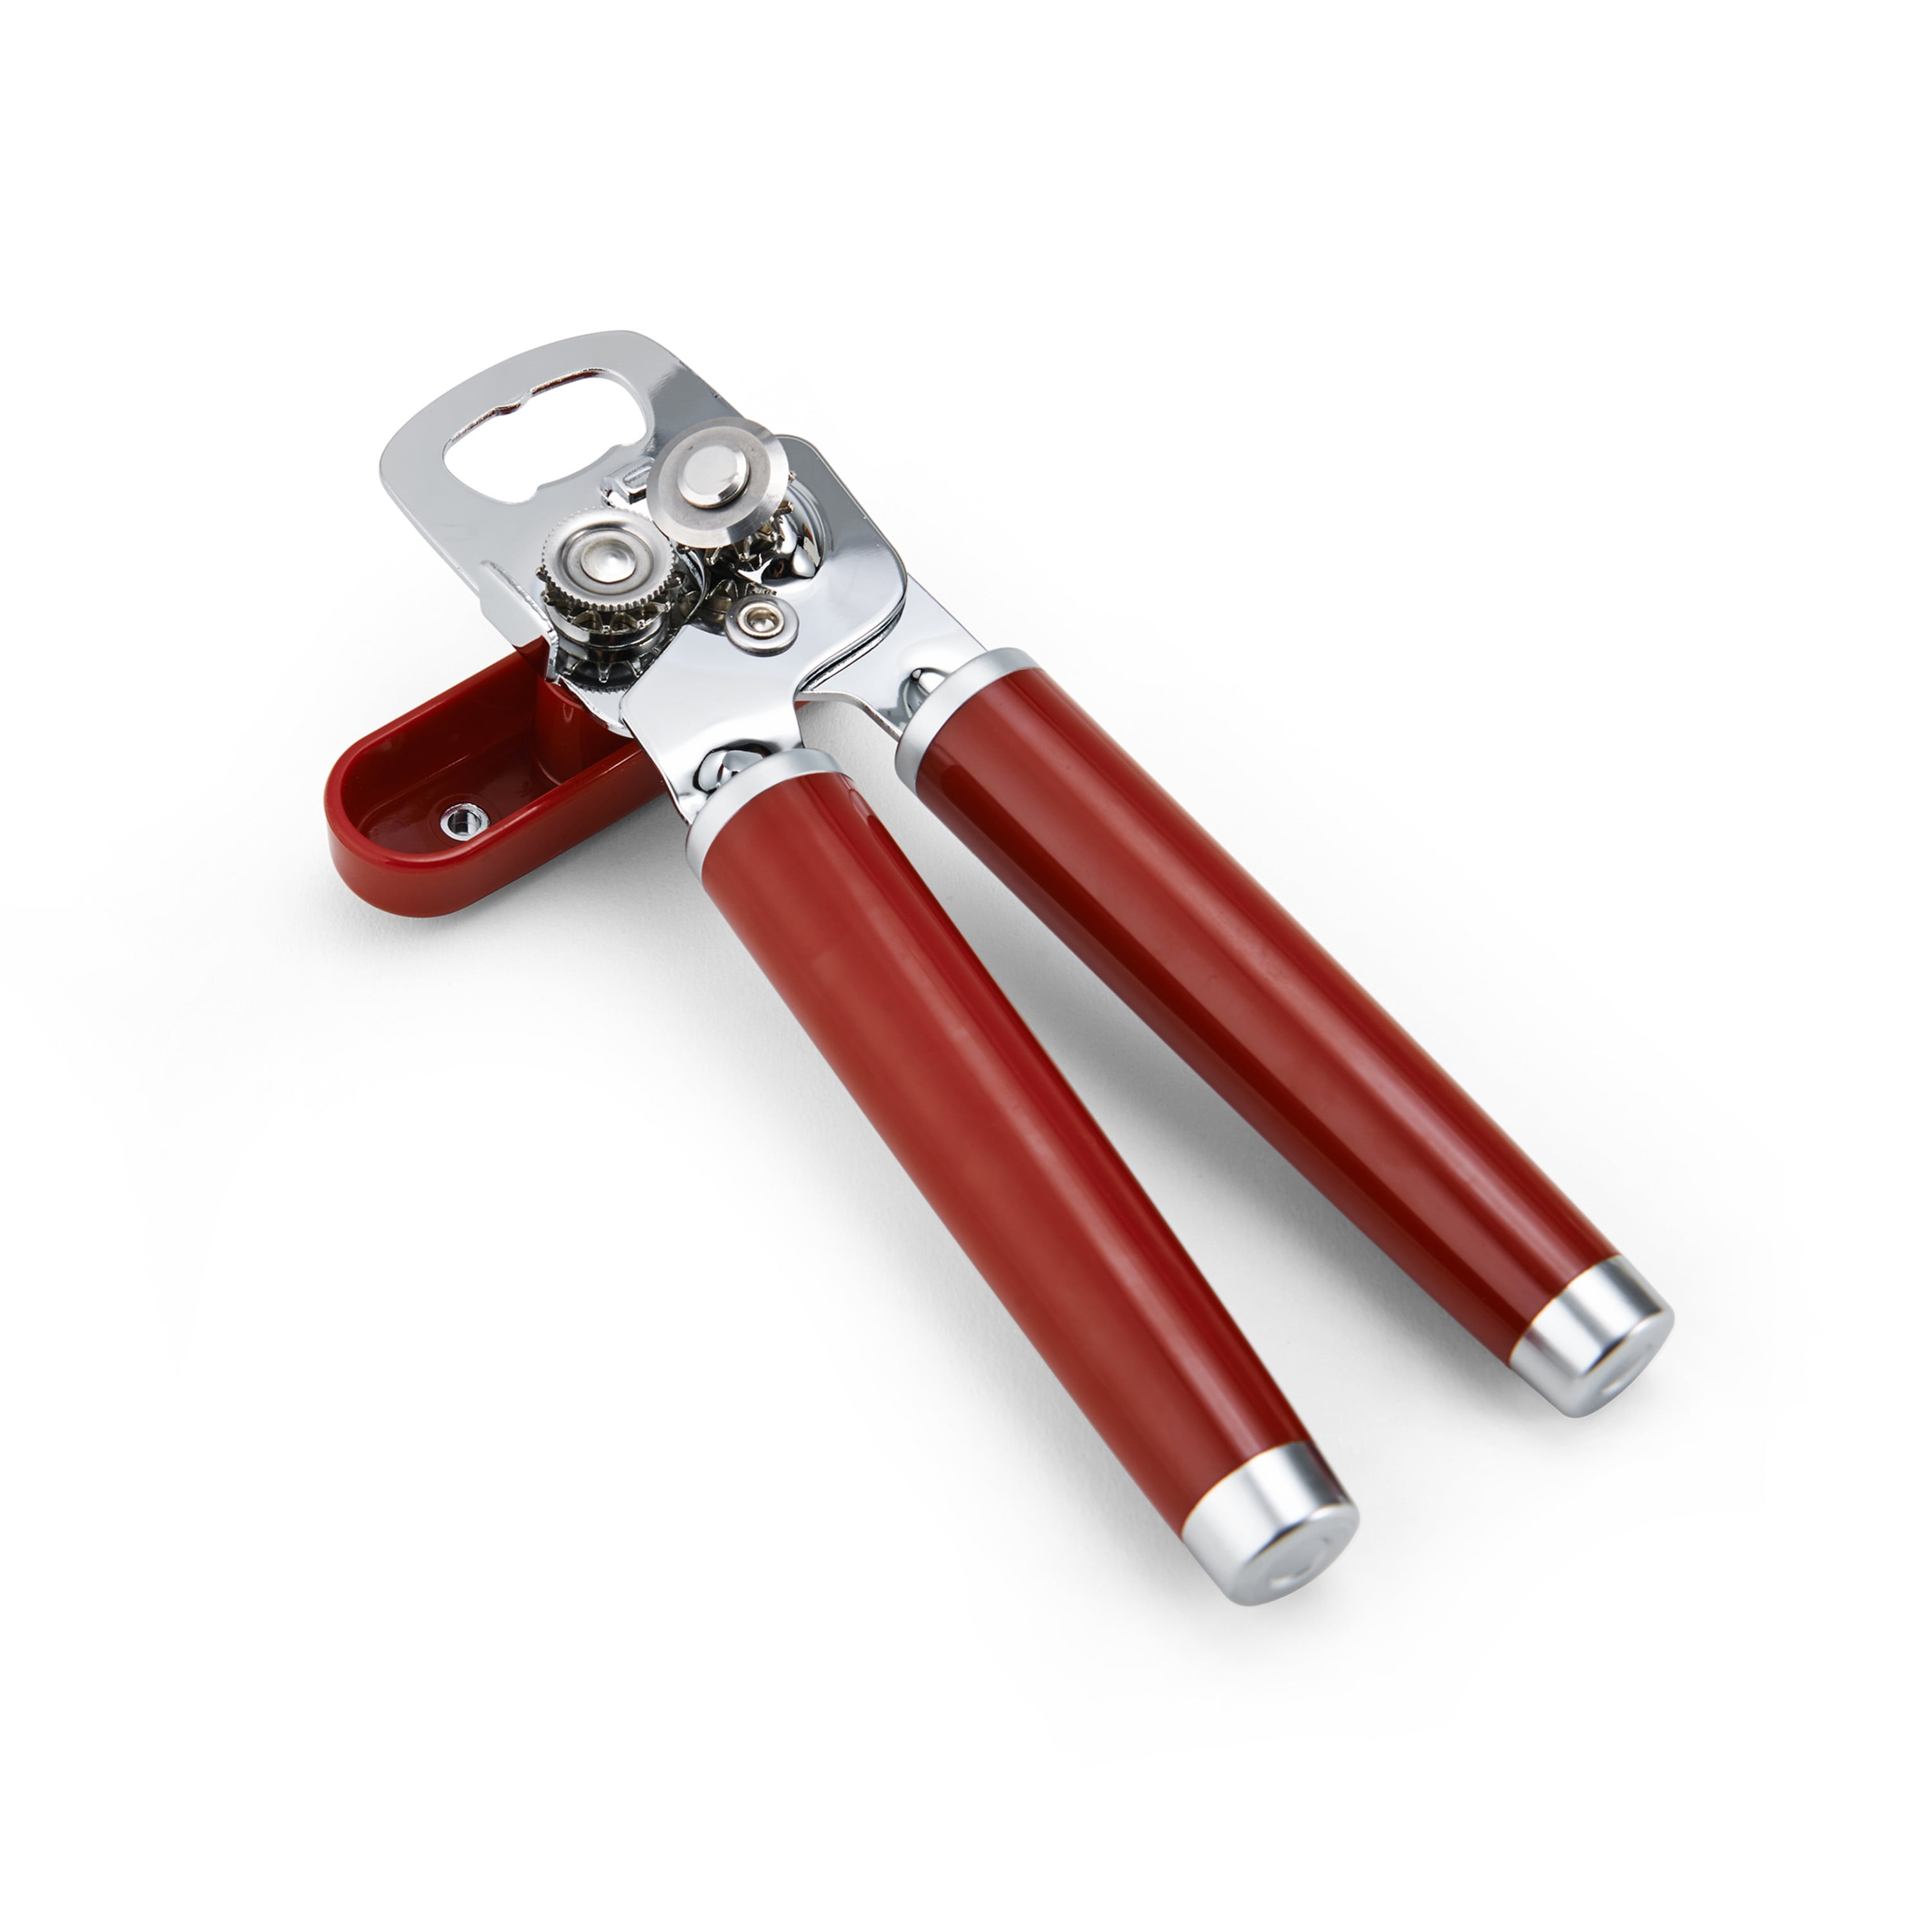 Stainless Steel KitchenAid KitchenaAid Can Opener-Empire Red 21 x 5 x 4 cm 